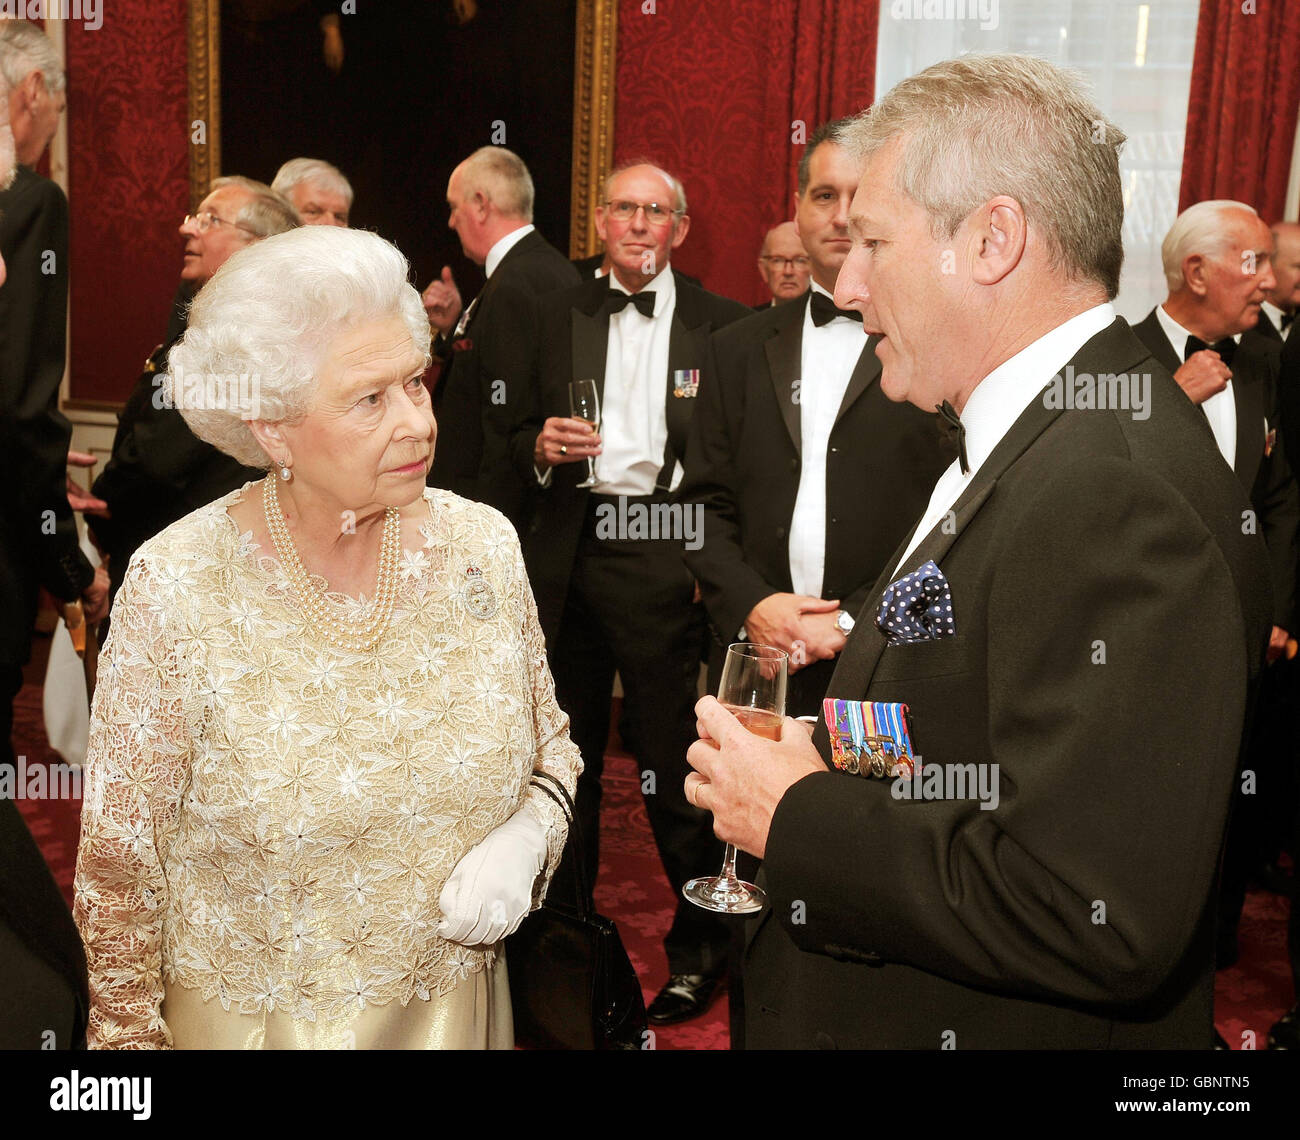 The Queen talks to Col Tim Collins who gave an inspirational eve of battle speech to his troops before the invasion of Iraq in 2003, at the Riding Masters, Quatermasters and Directors of Music Association reception at St James's Palace in London. Stock Photo